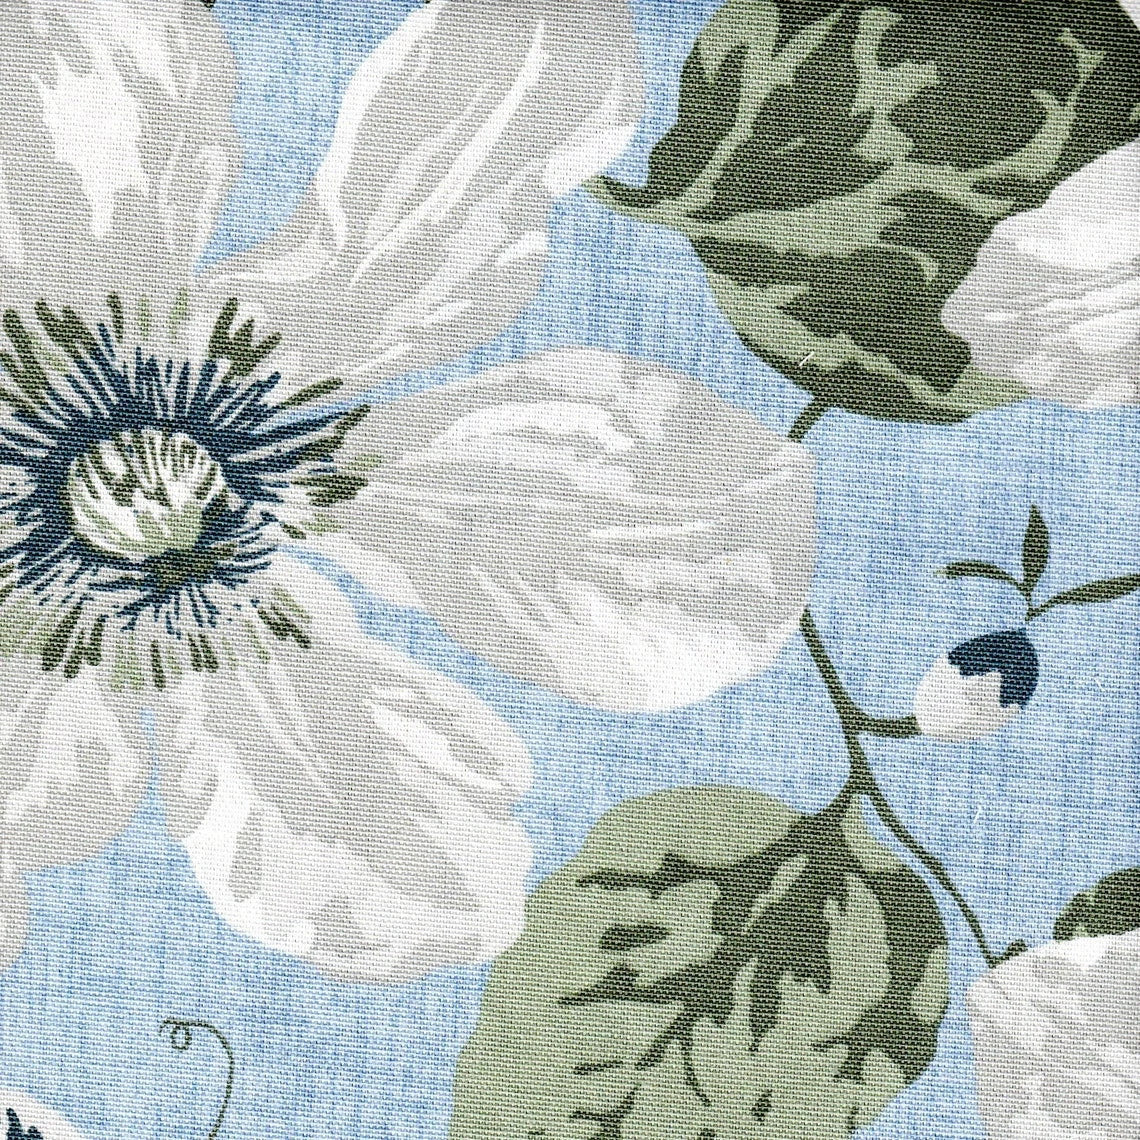 pillow sham in nelly antique blue floral, large scale